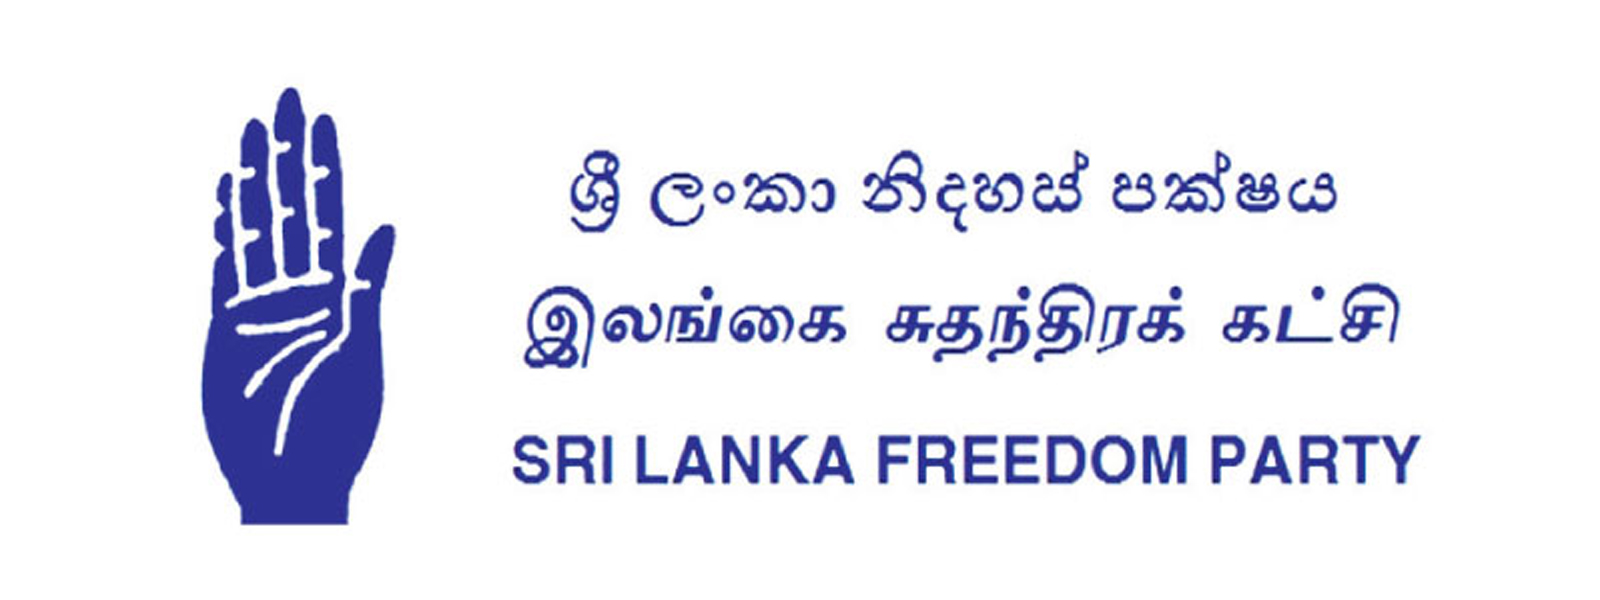 What is SLFP's stance in the future?